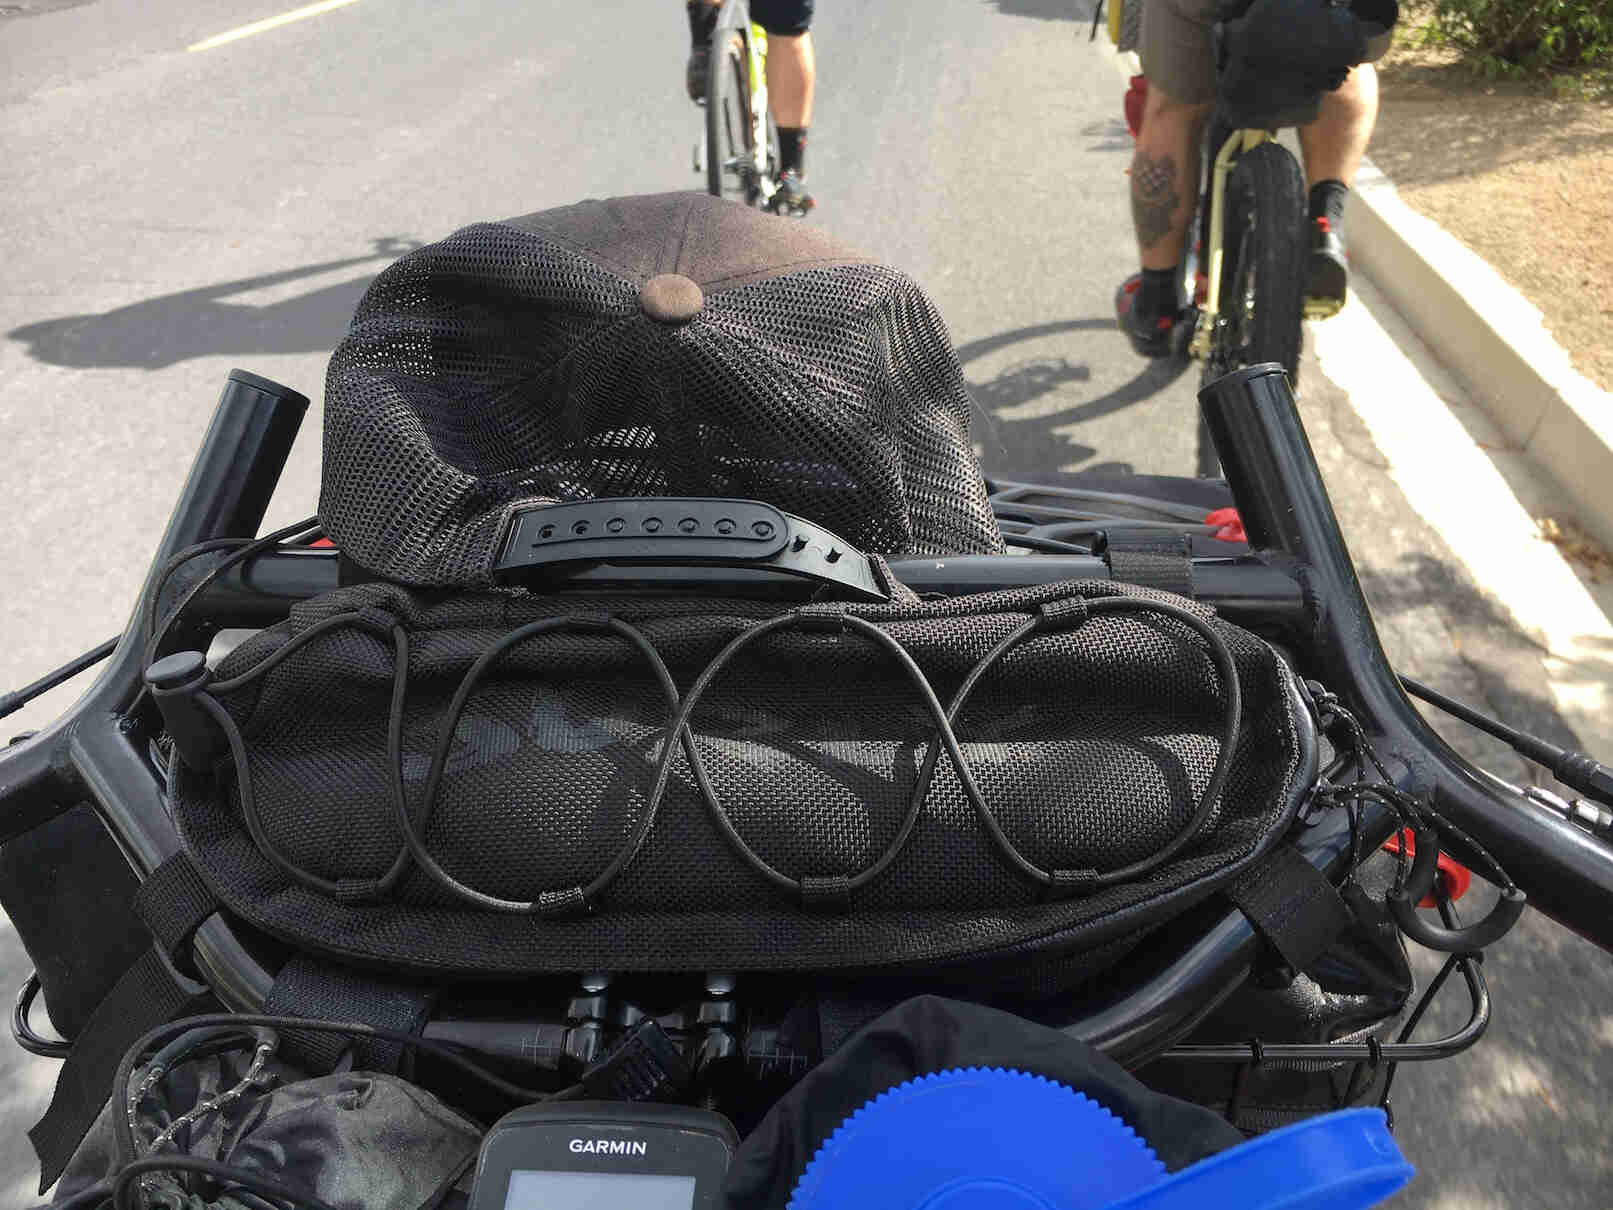 Downward close up of the handlebars loaded with gear on a bike with other cyclist in front view